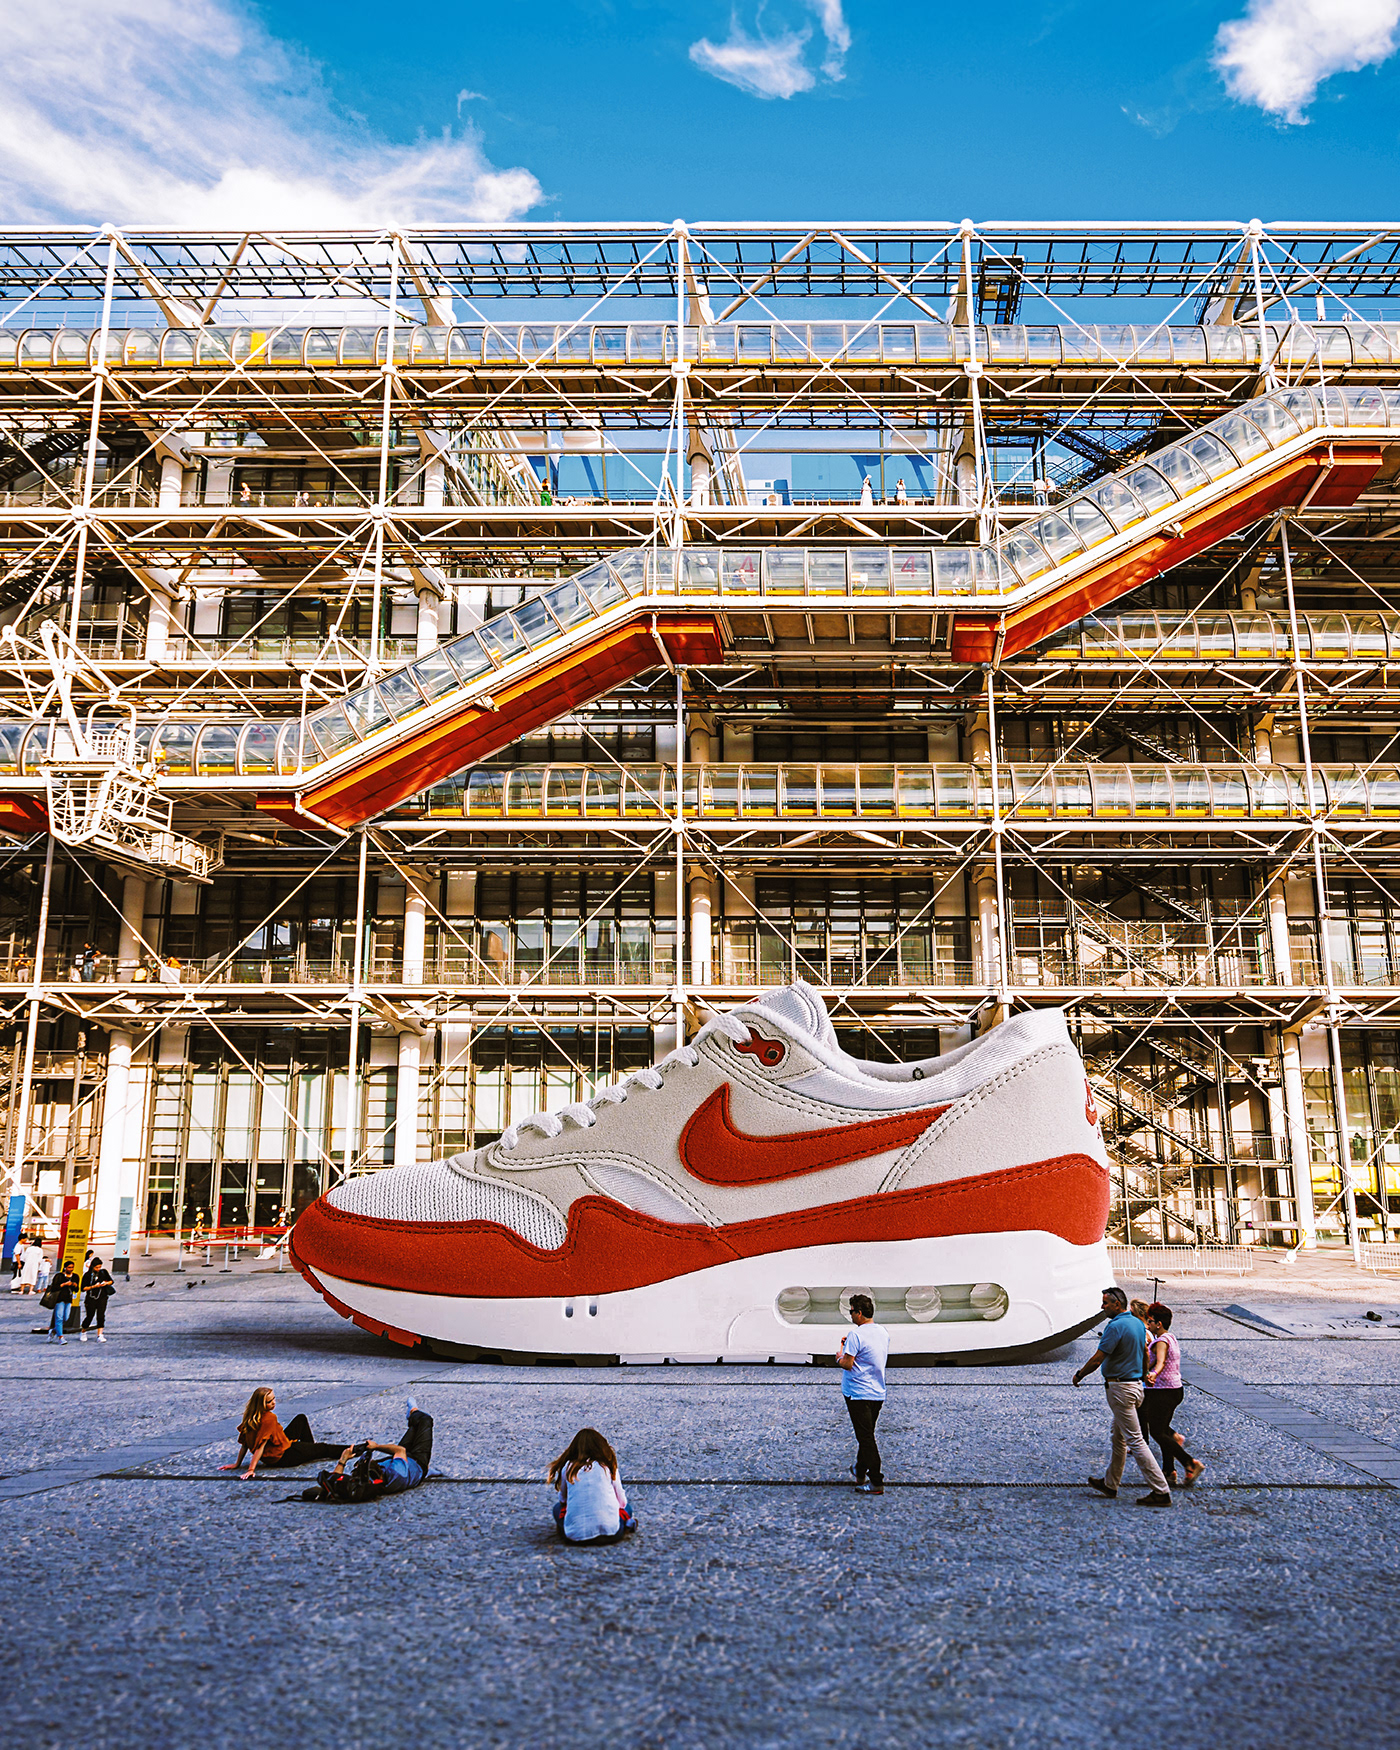 Giant sneaker photo composite in France. Retouching using Photoshop